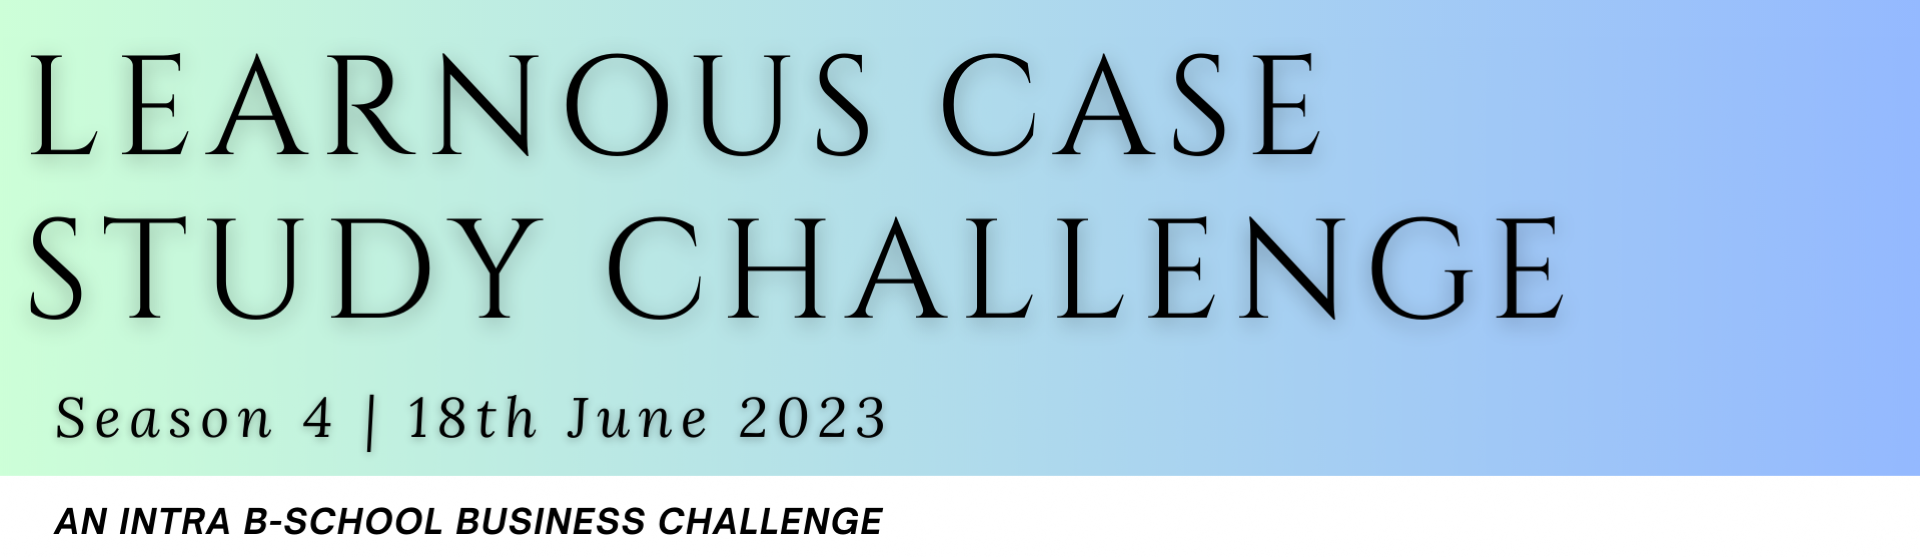 Participate in the Learnous Case Study Challenge (Season 4) before 29 May 23, 06:29 PM CUT